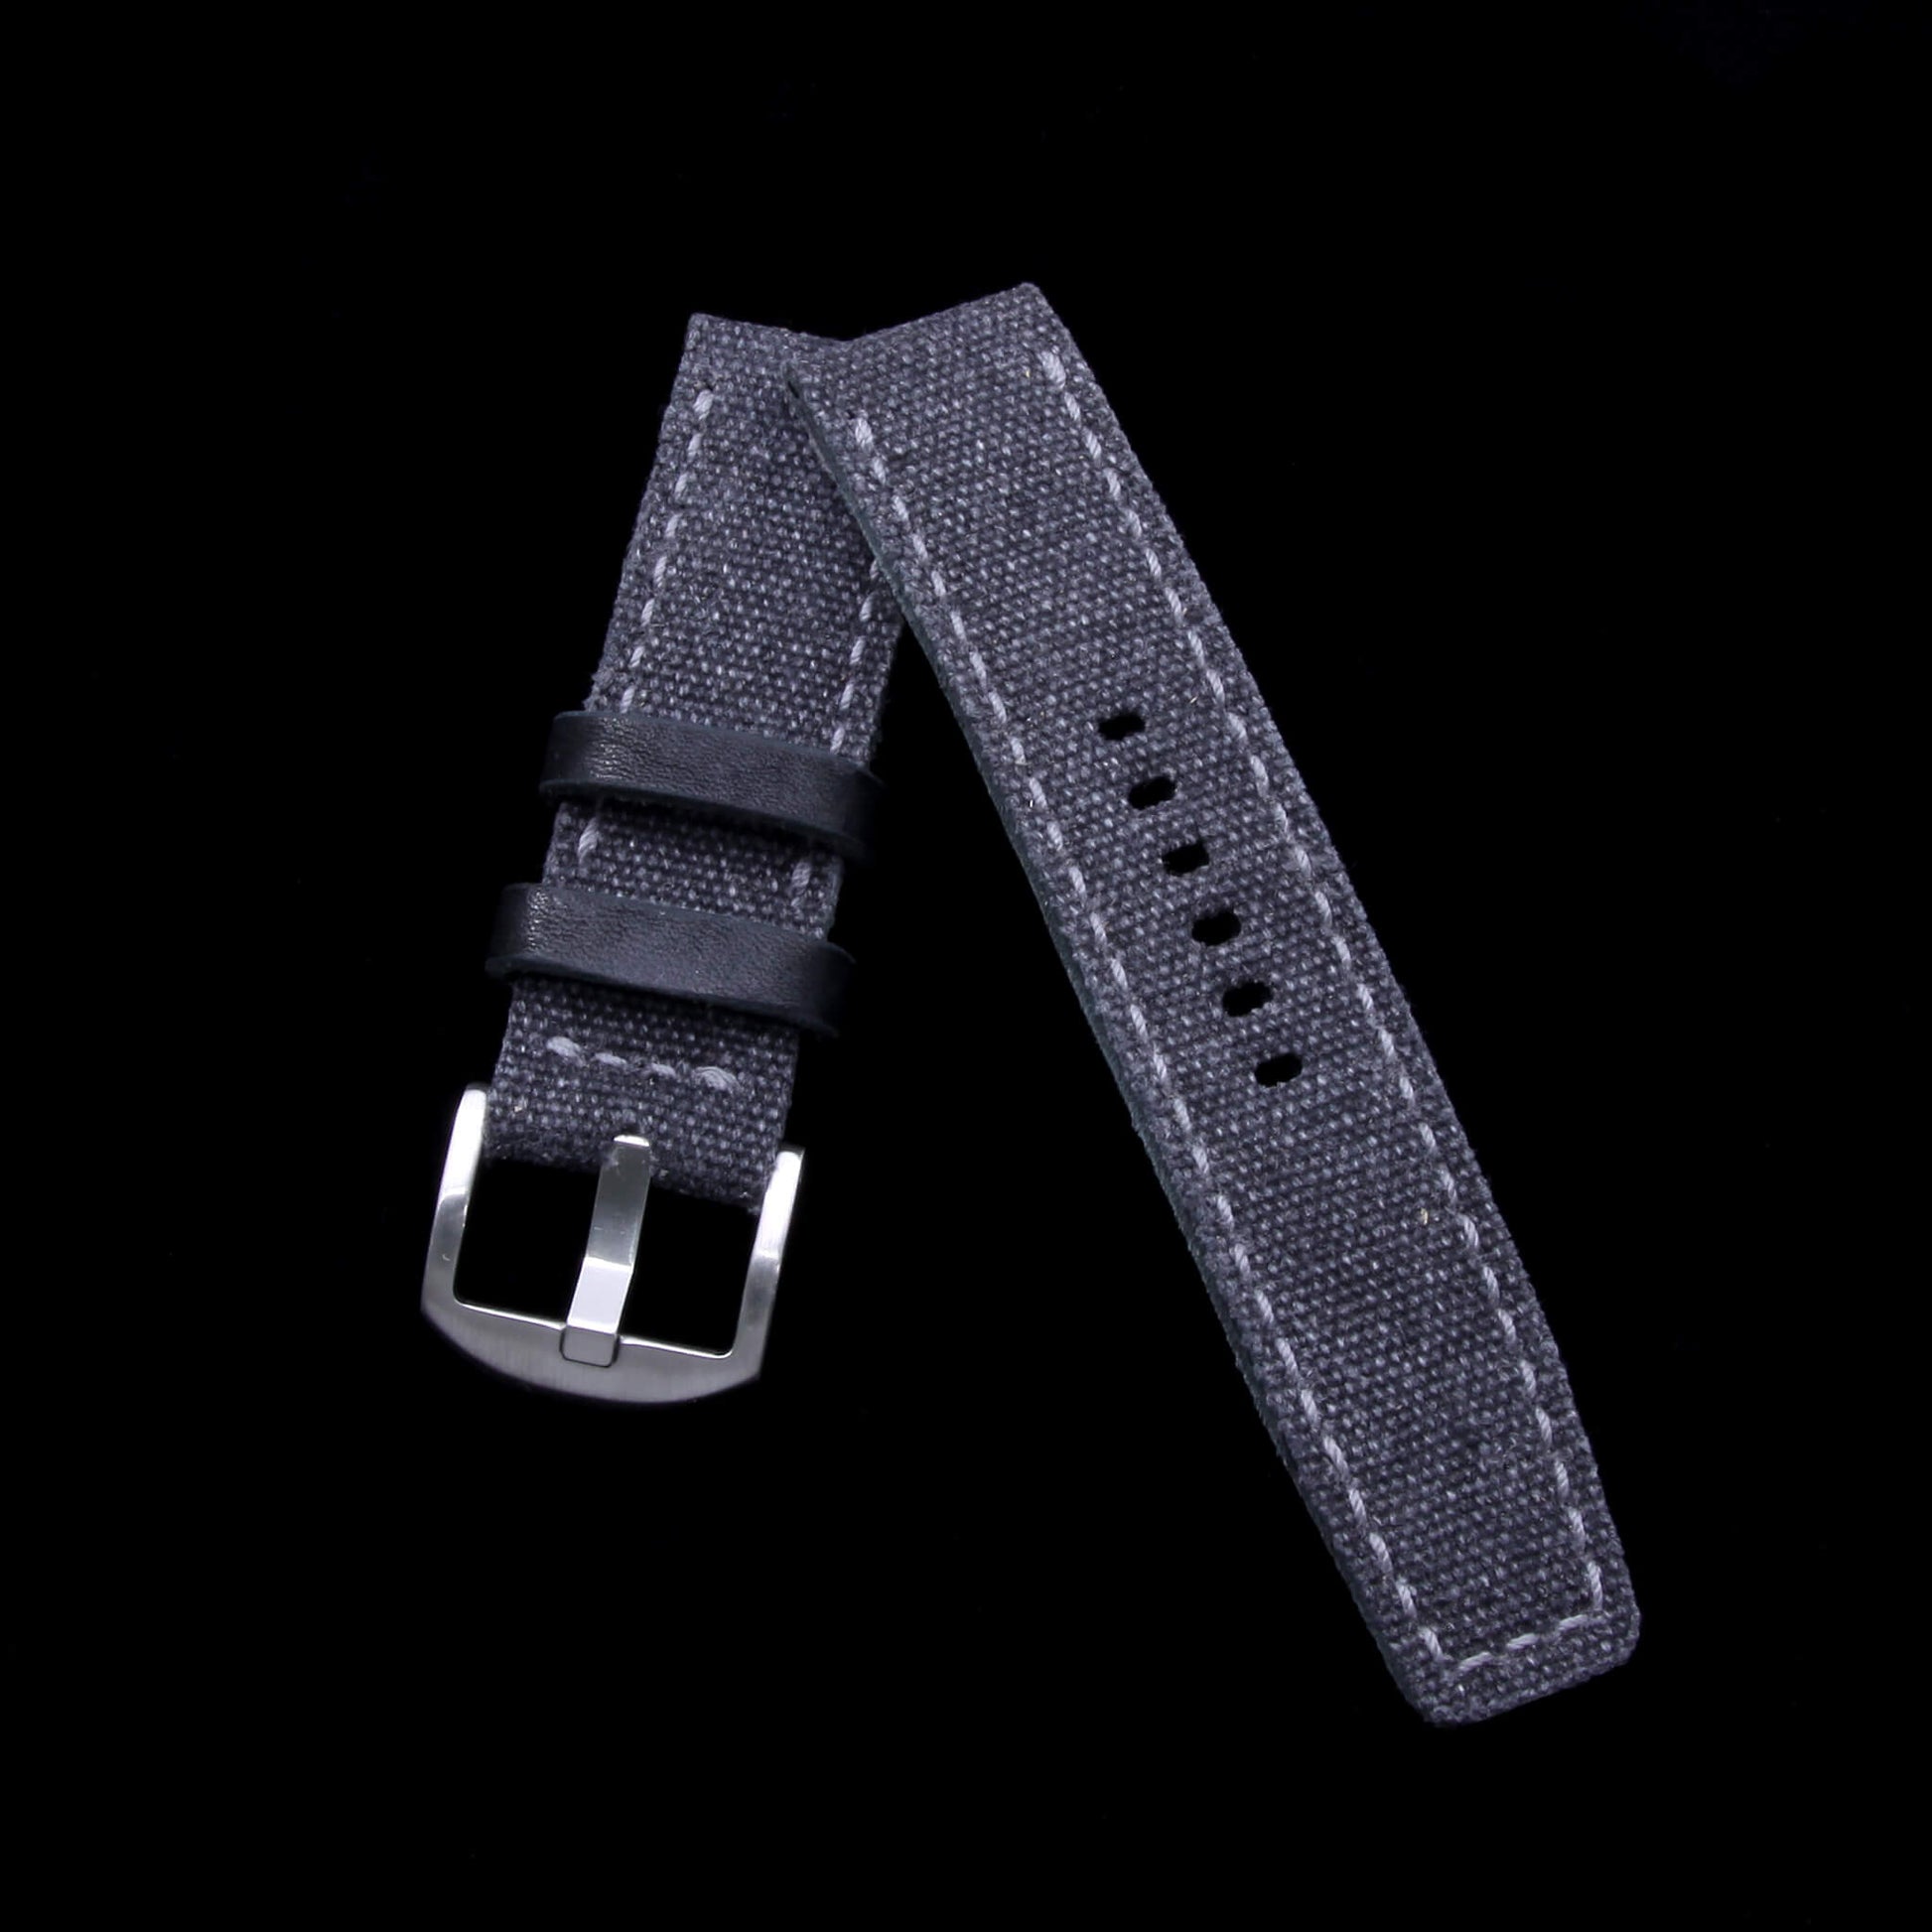 2-Piece Full Stitch Leather Watch Strap, made with Stone Washed Black Canvas and Italian veg-tanned leather lining, handcrafted by Cozy Handmade